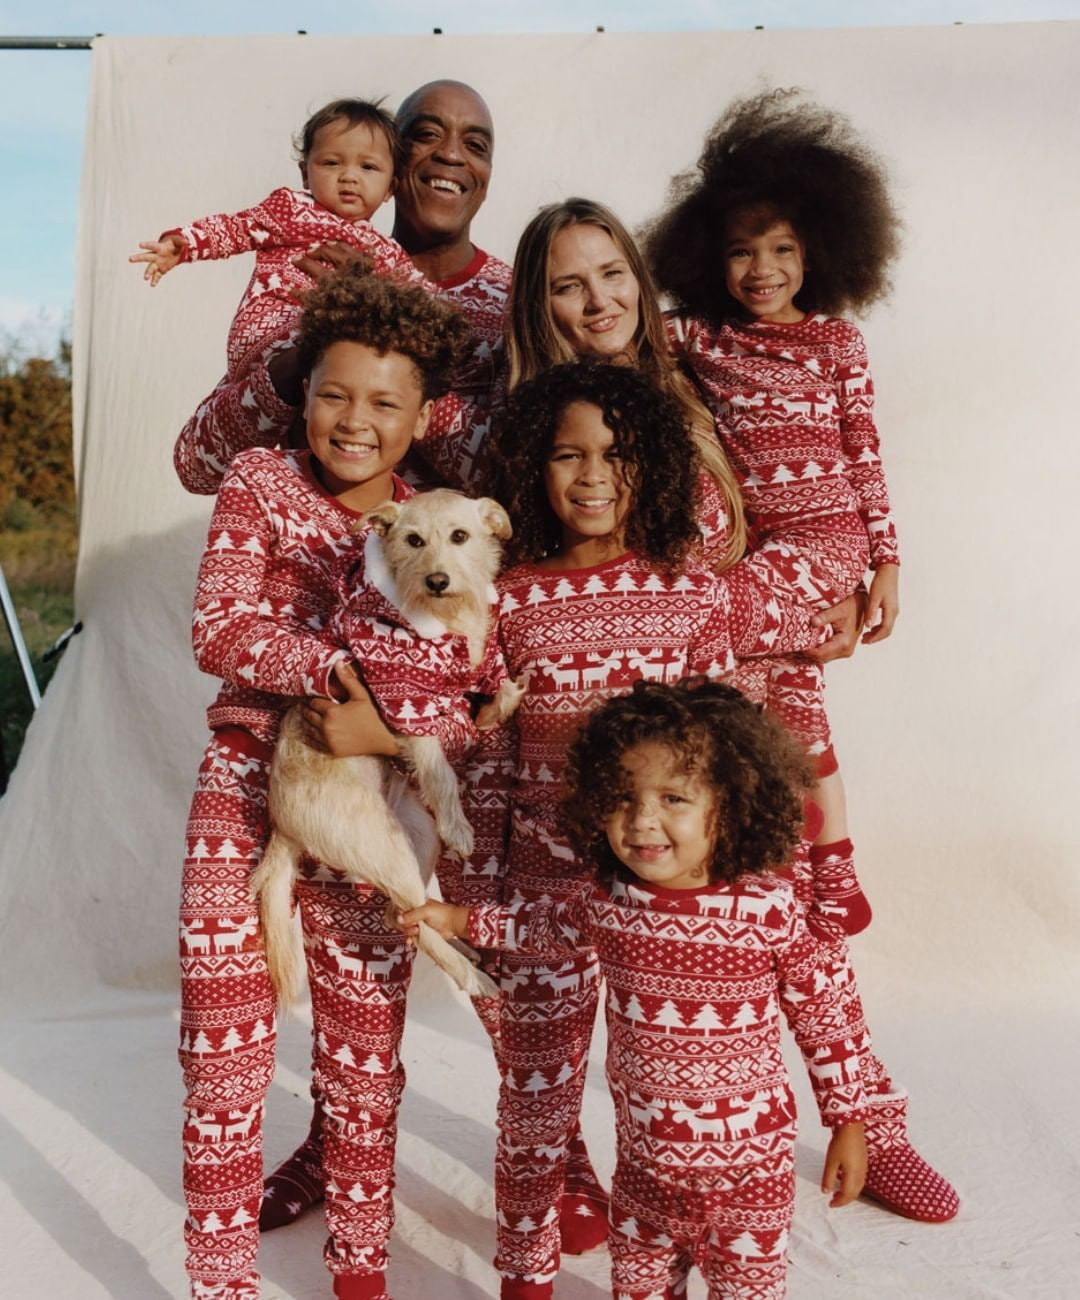 Christmas Printed Family Outfit  Family Clothing Sets Thecurvestory